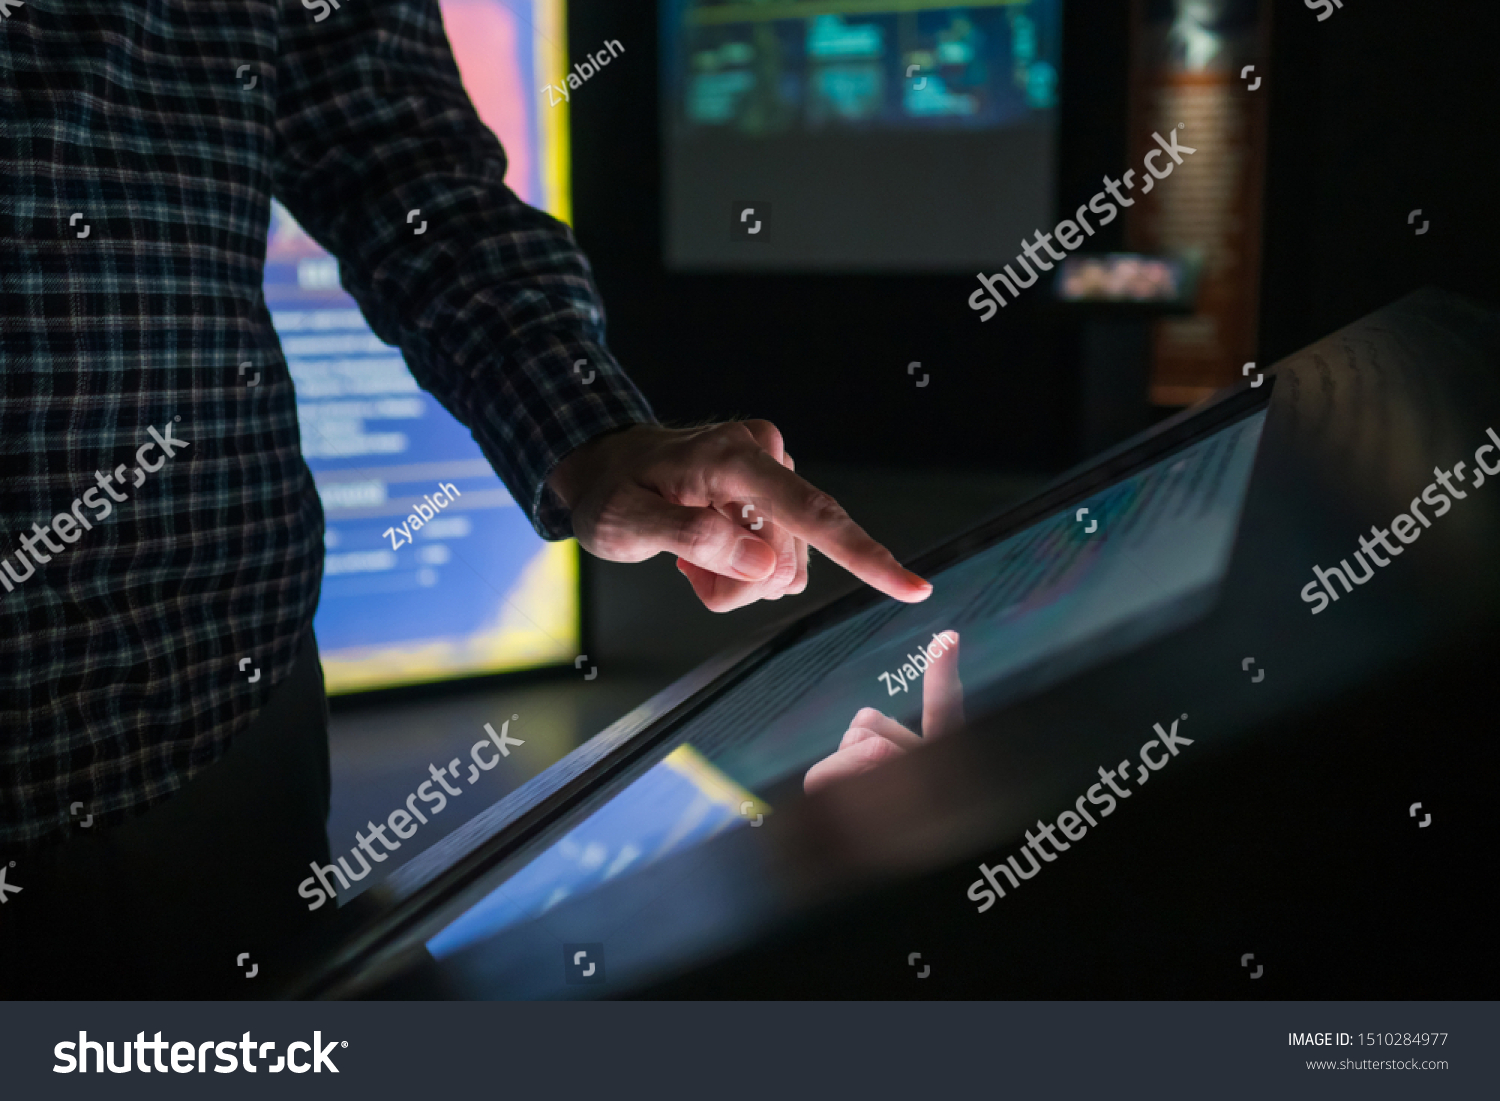 Man hand using interactive touchscreen display of electronic multimedia terminal at modern museum or exhibition. Evening time, low light illumination. Education, futuristic and technology concept #1510284977